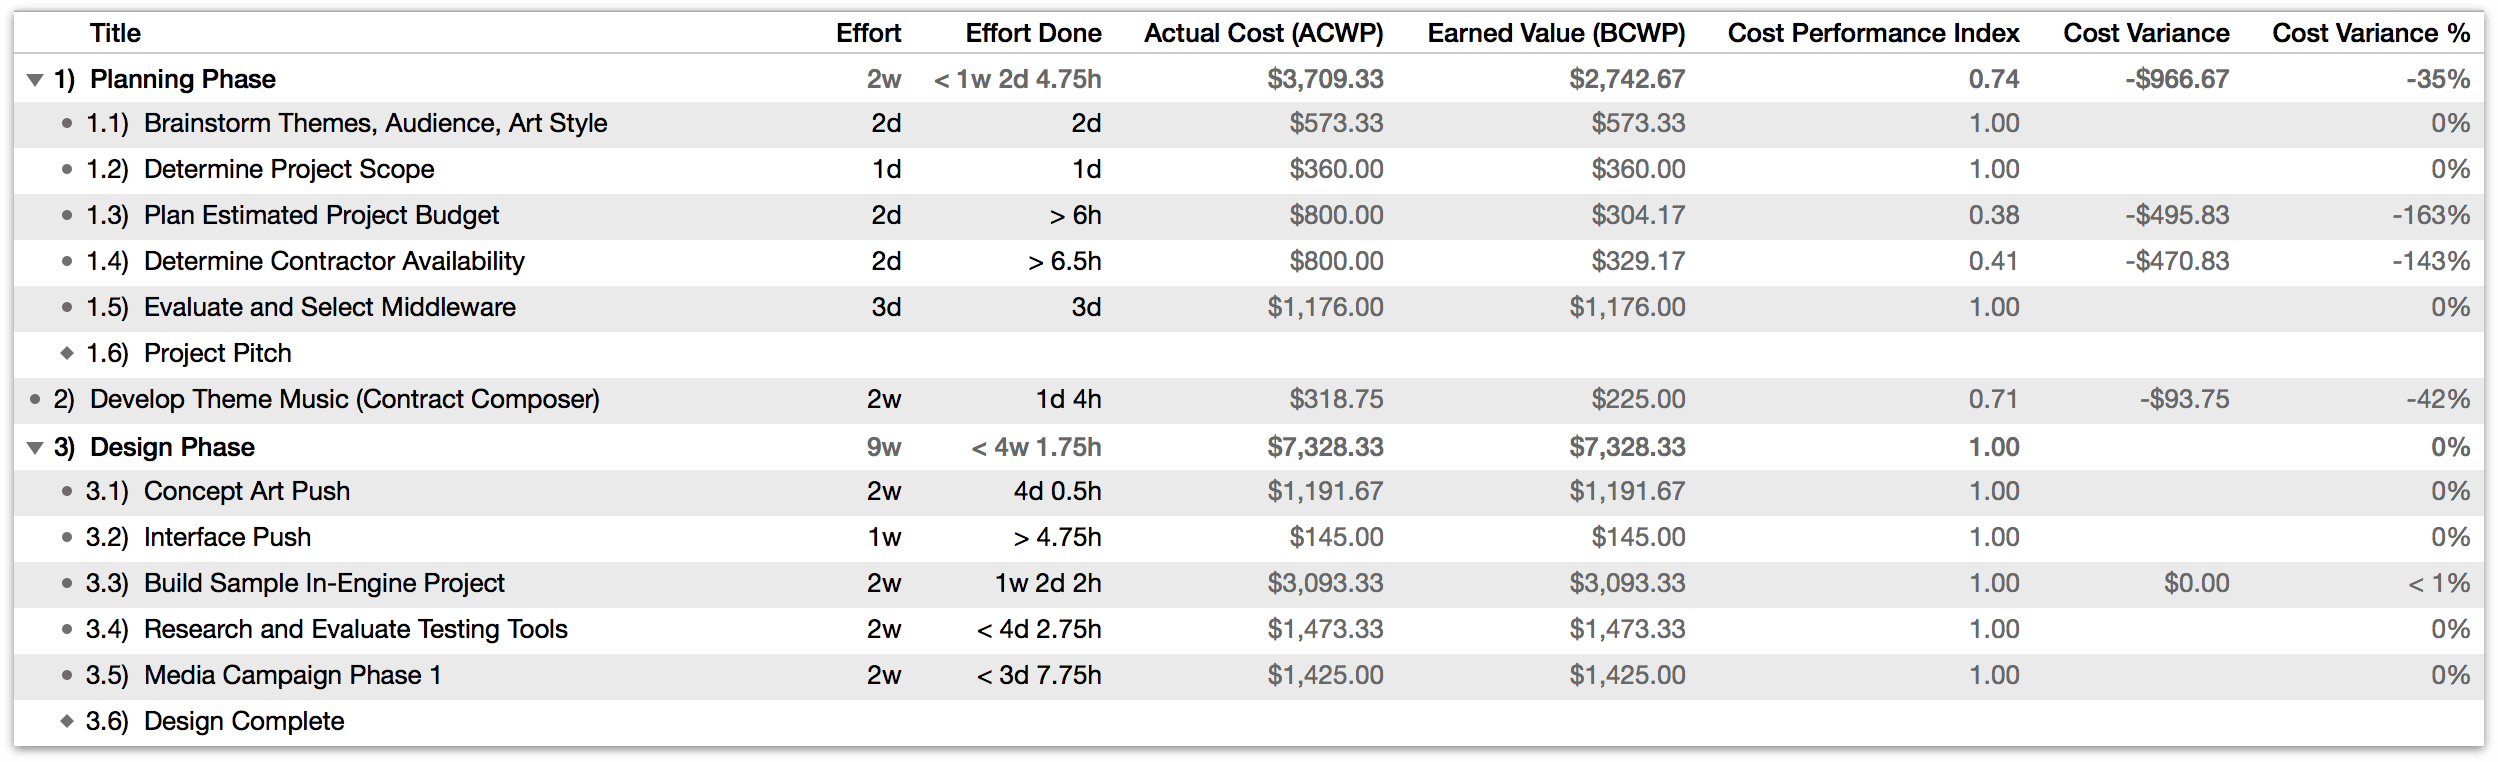 Earned Value Analysis columns related to budget.